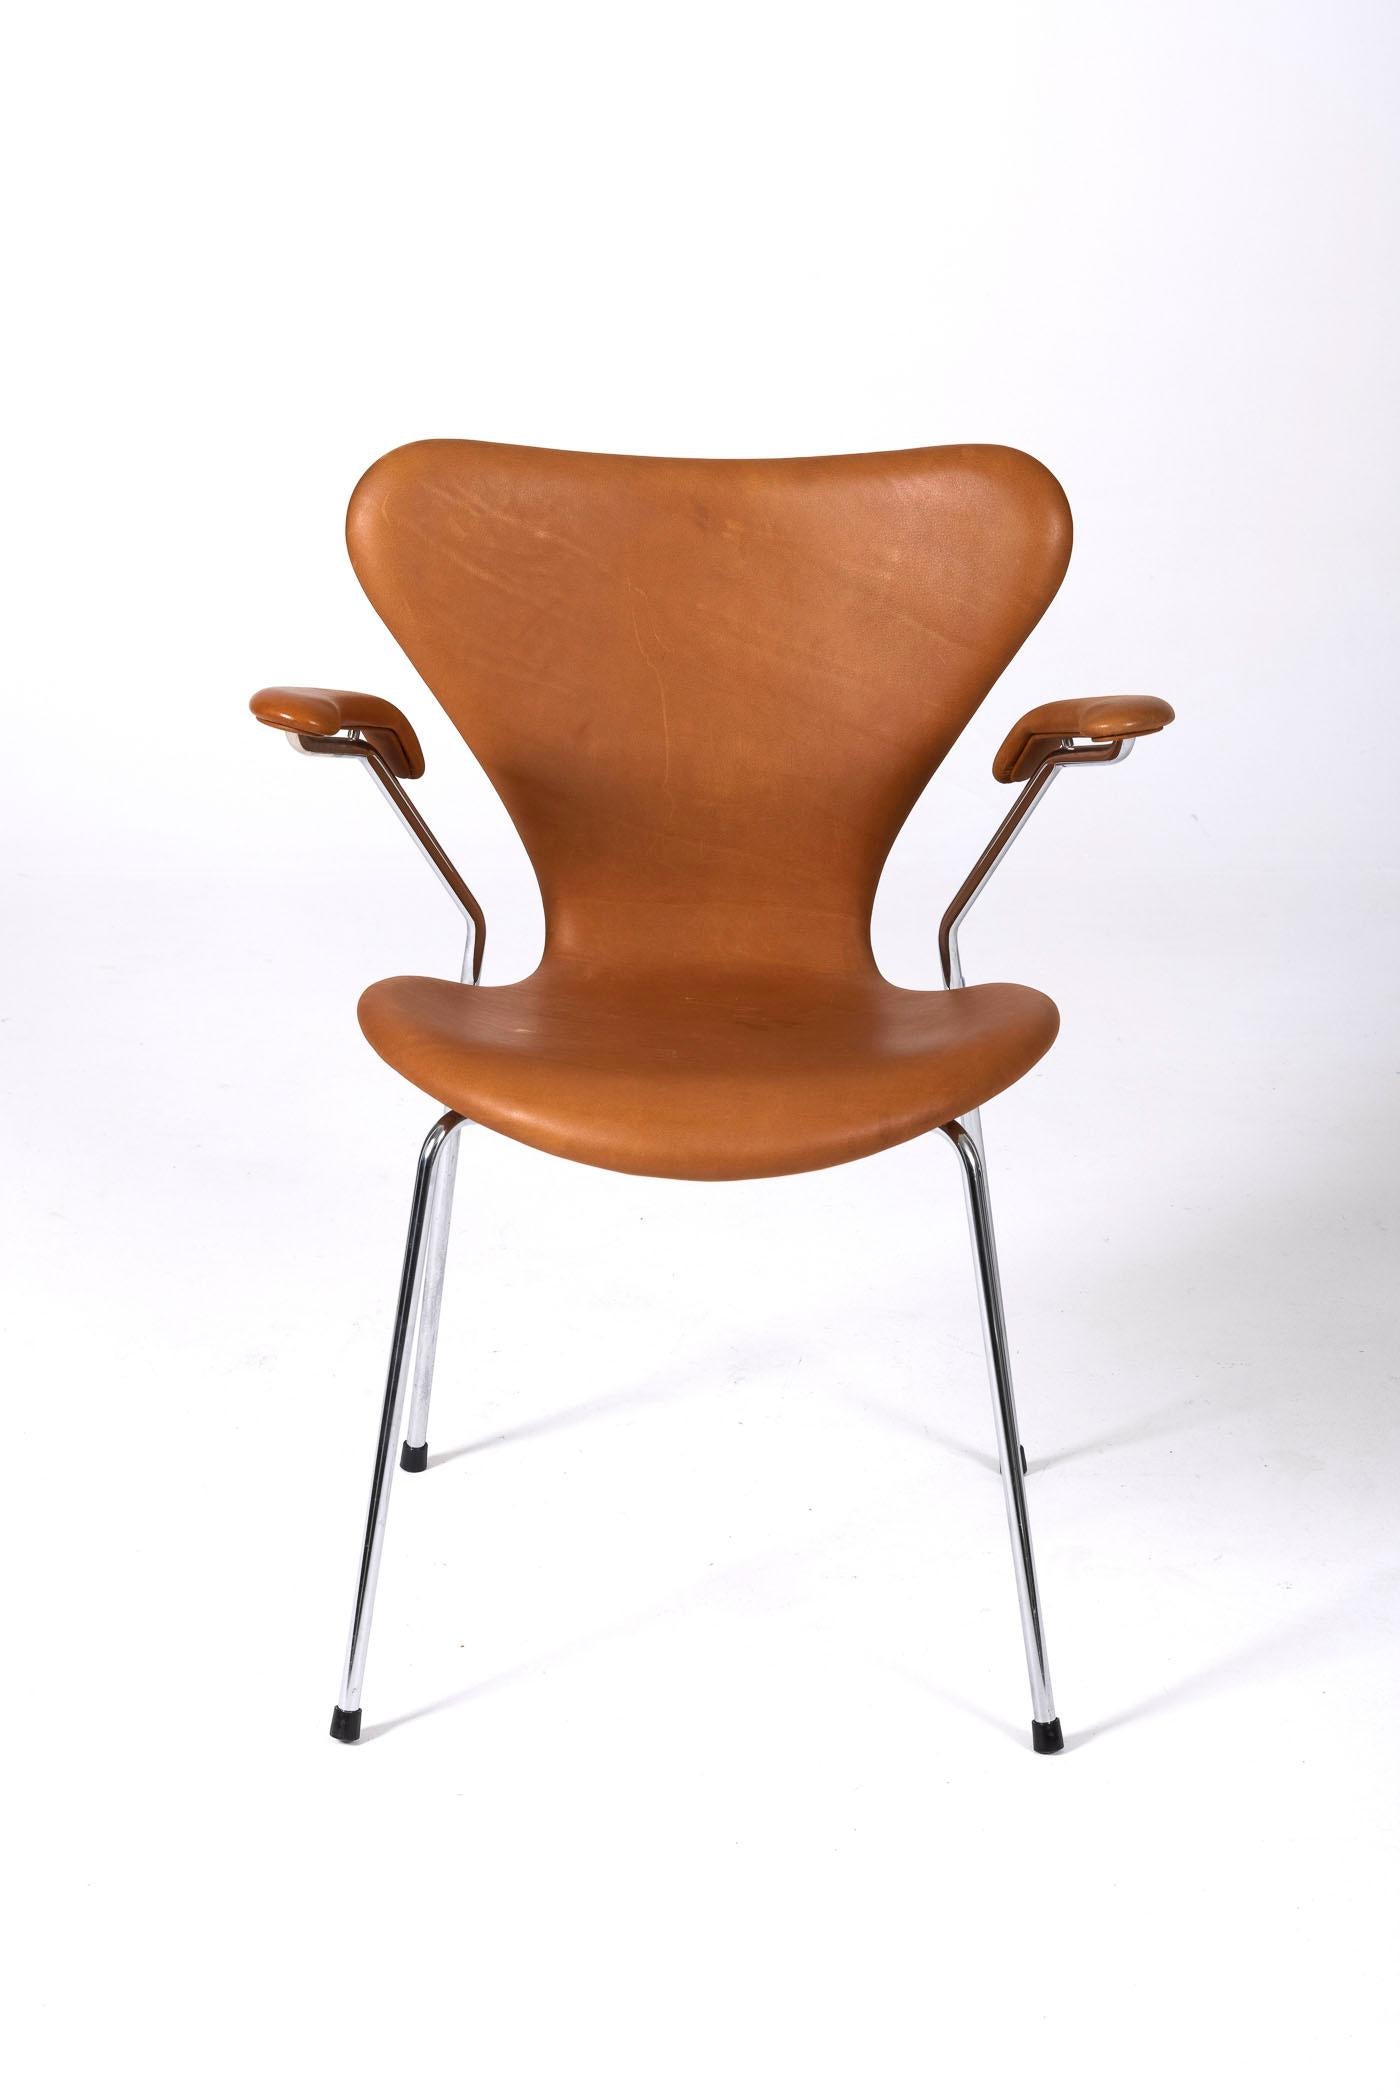 Brown leather armchair model 3208 or 